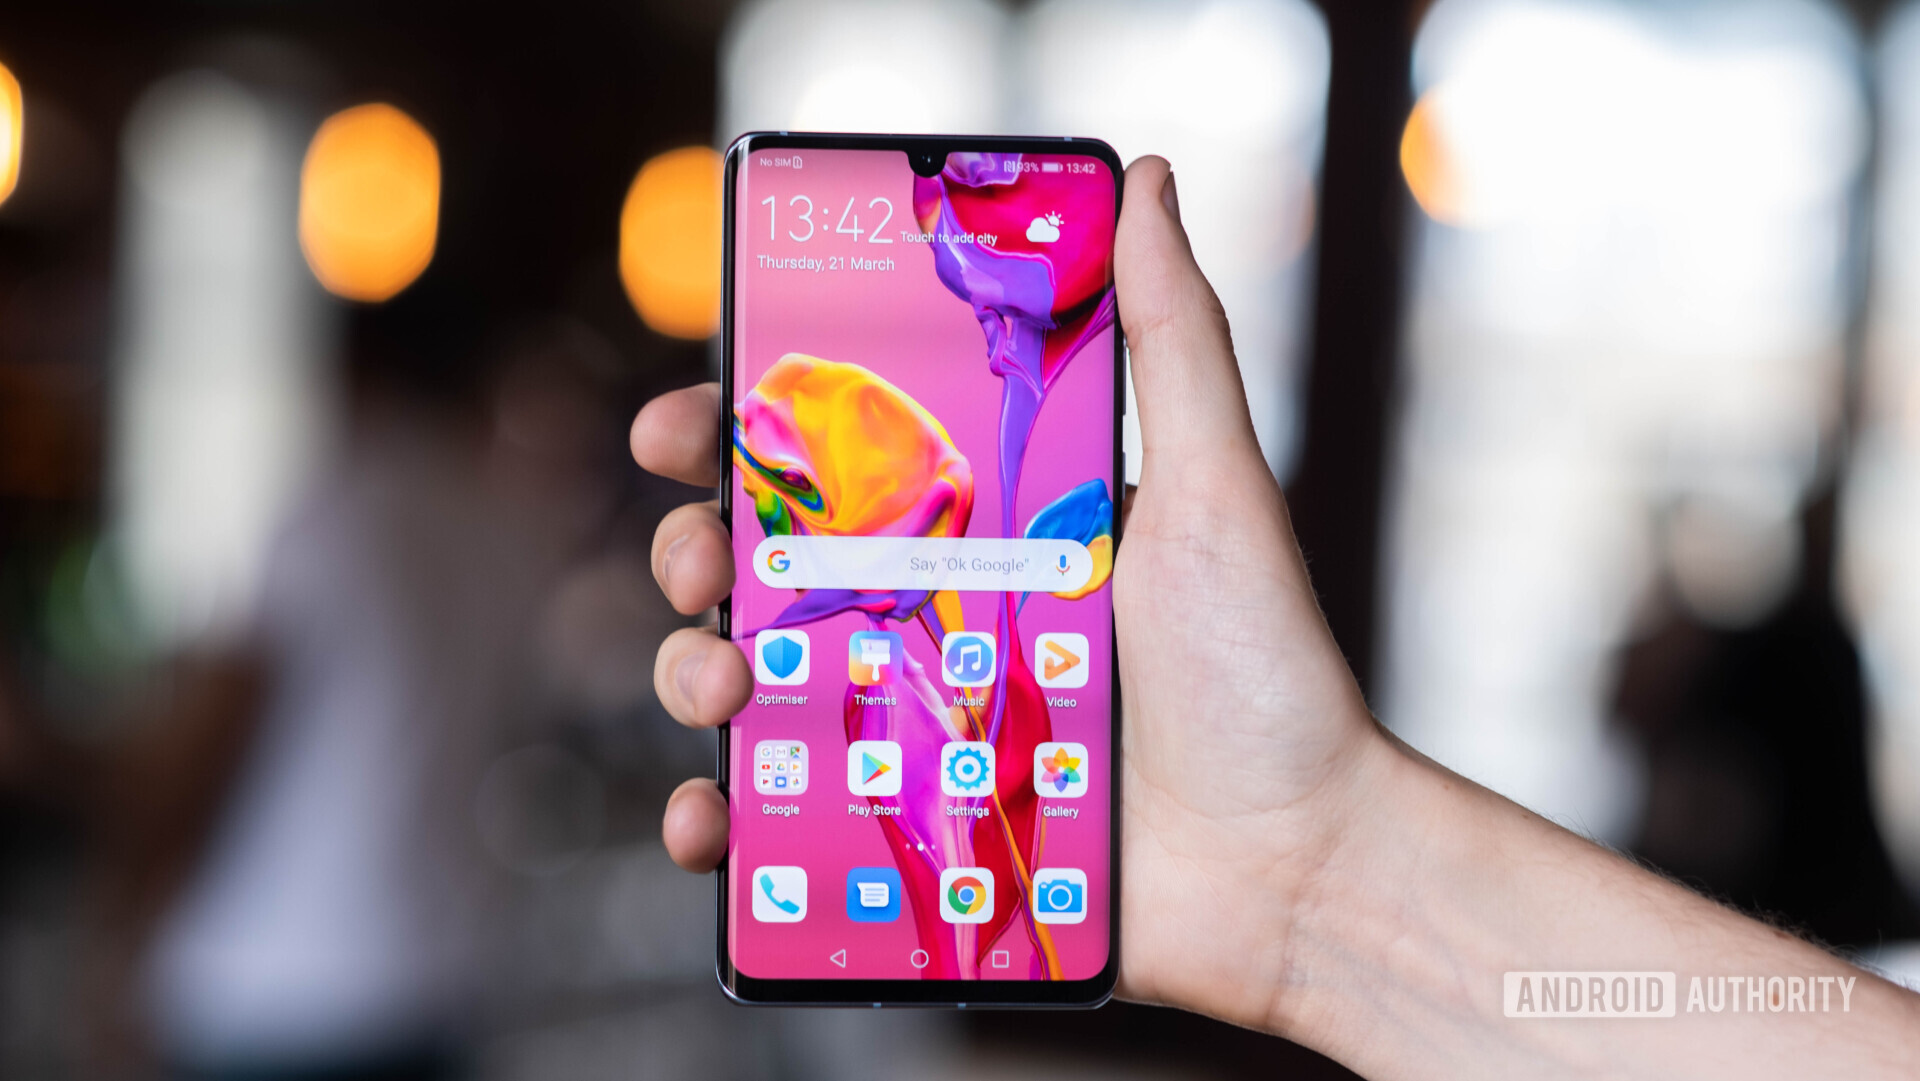 Download HUAWEI P30 Pro wallpapers here